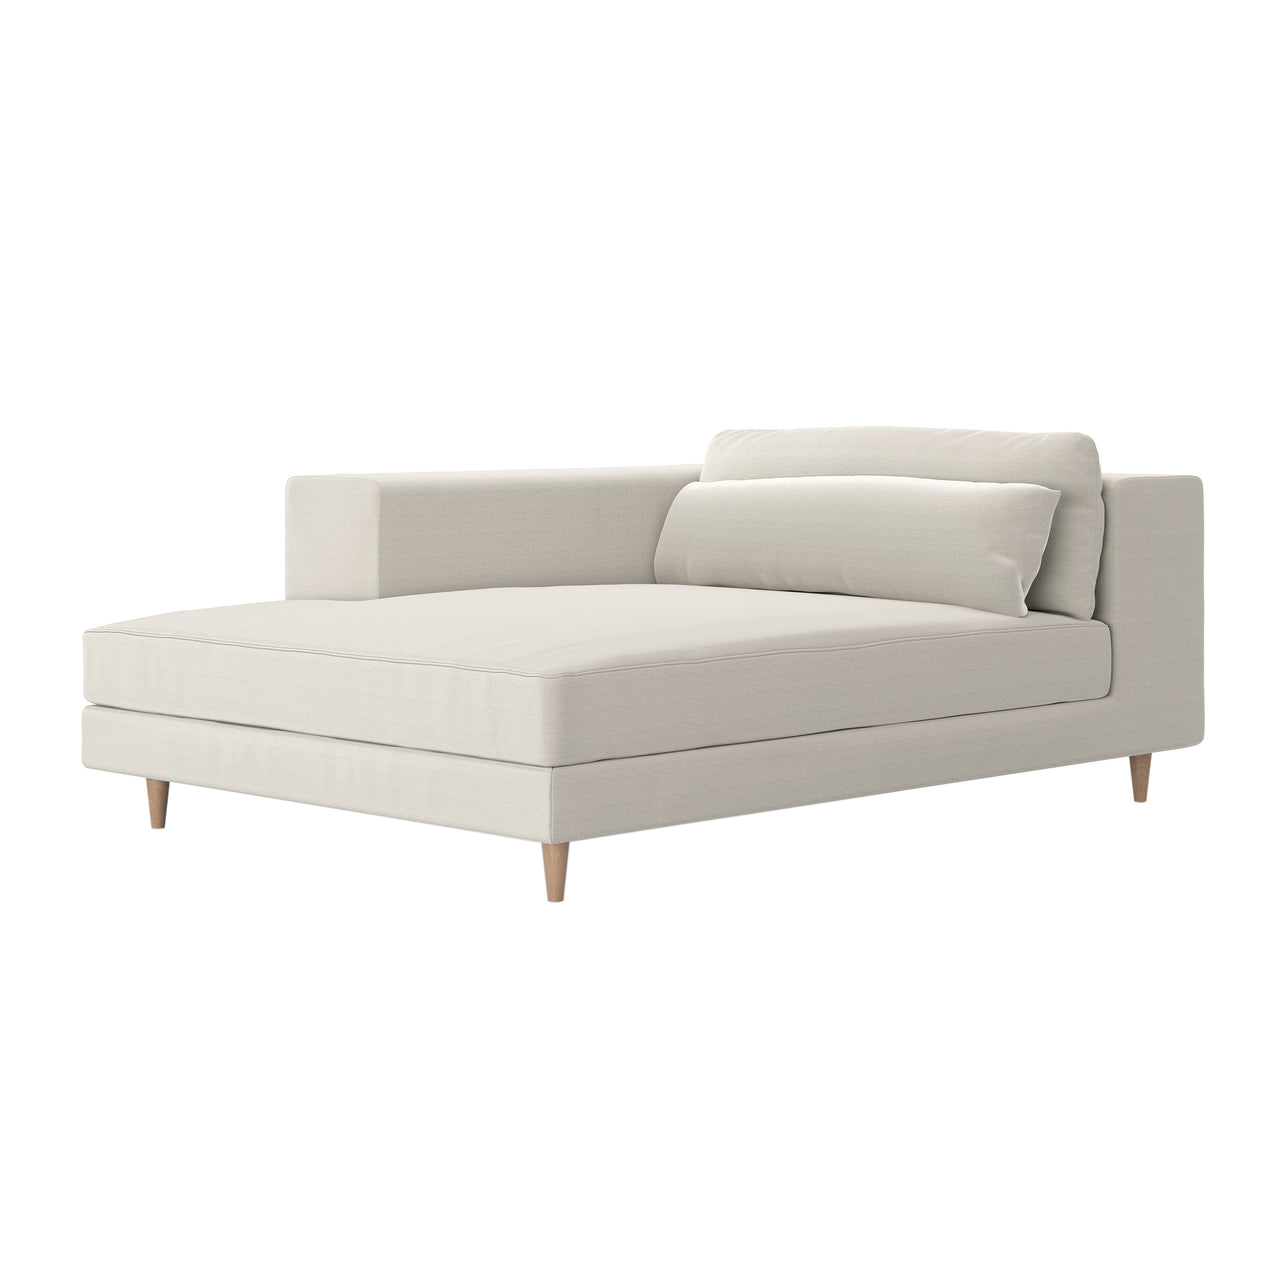 Atelier Sofa Modules: Chaise Lounge - Left + Without Skirt